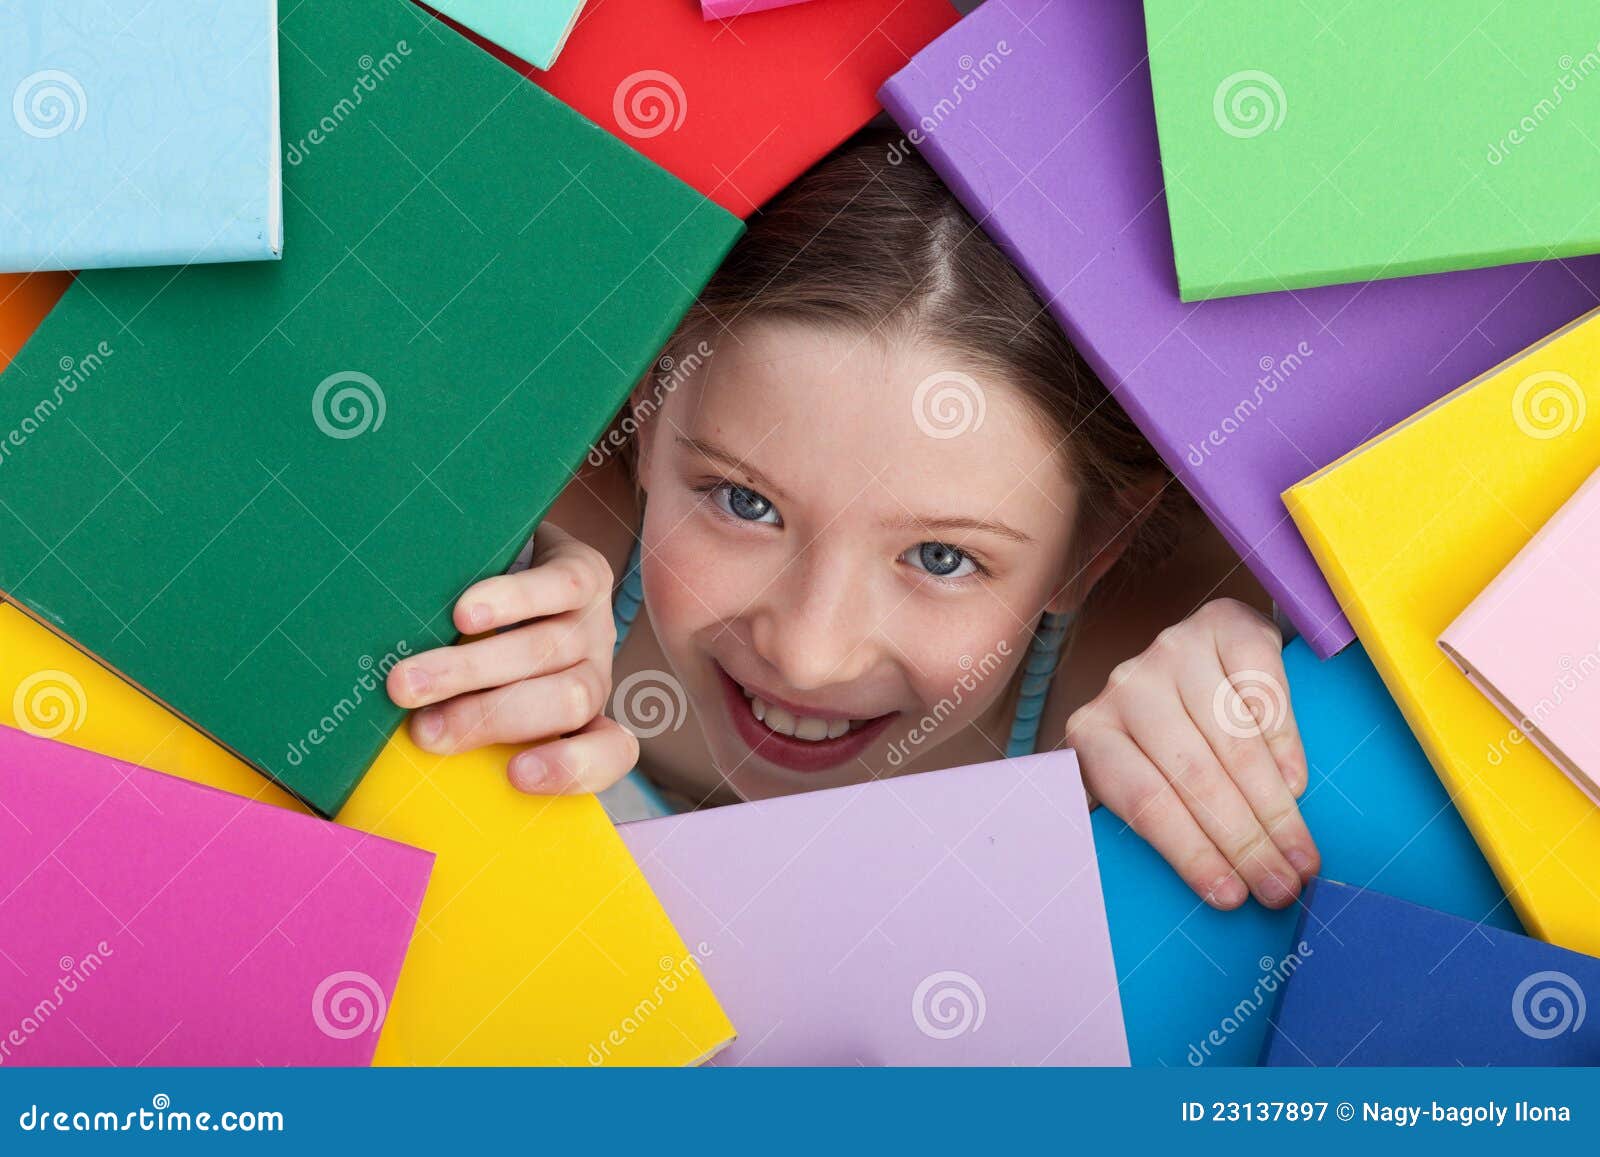 young girl emerging from beneath books